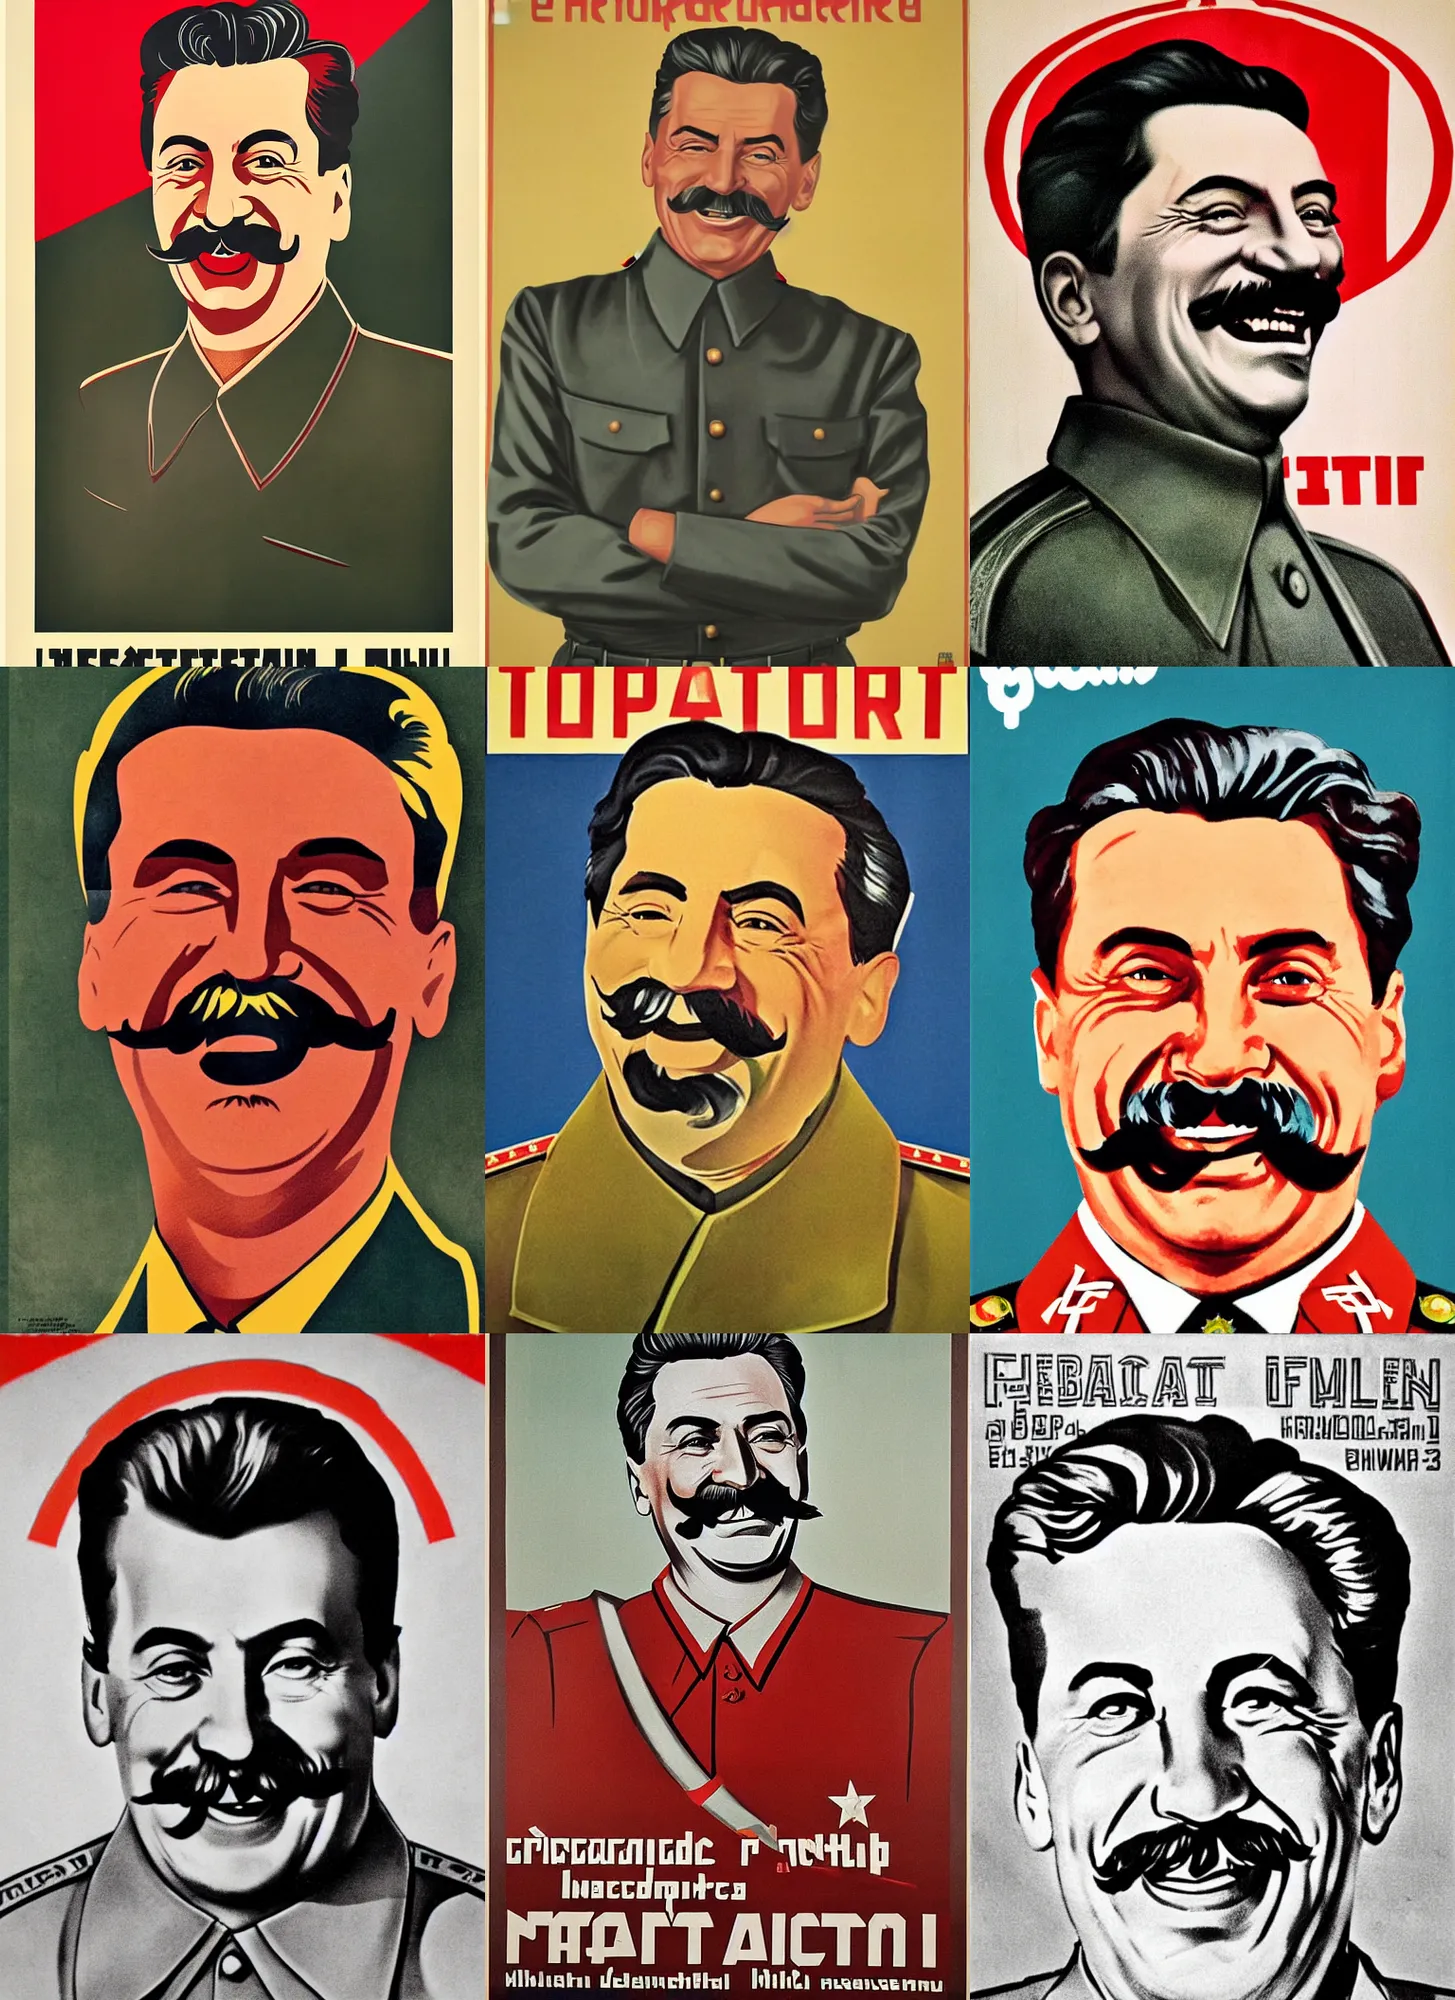 Prompt: portrait of stalin, propaganda poster, wholesome smile, detailed